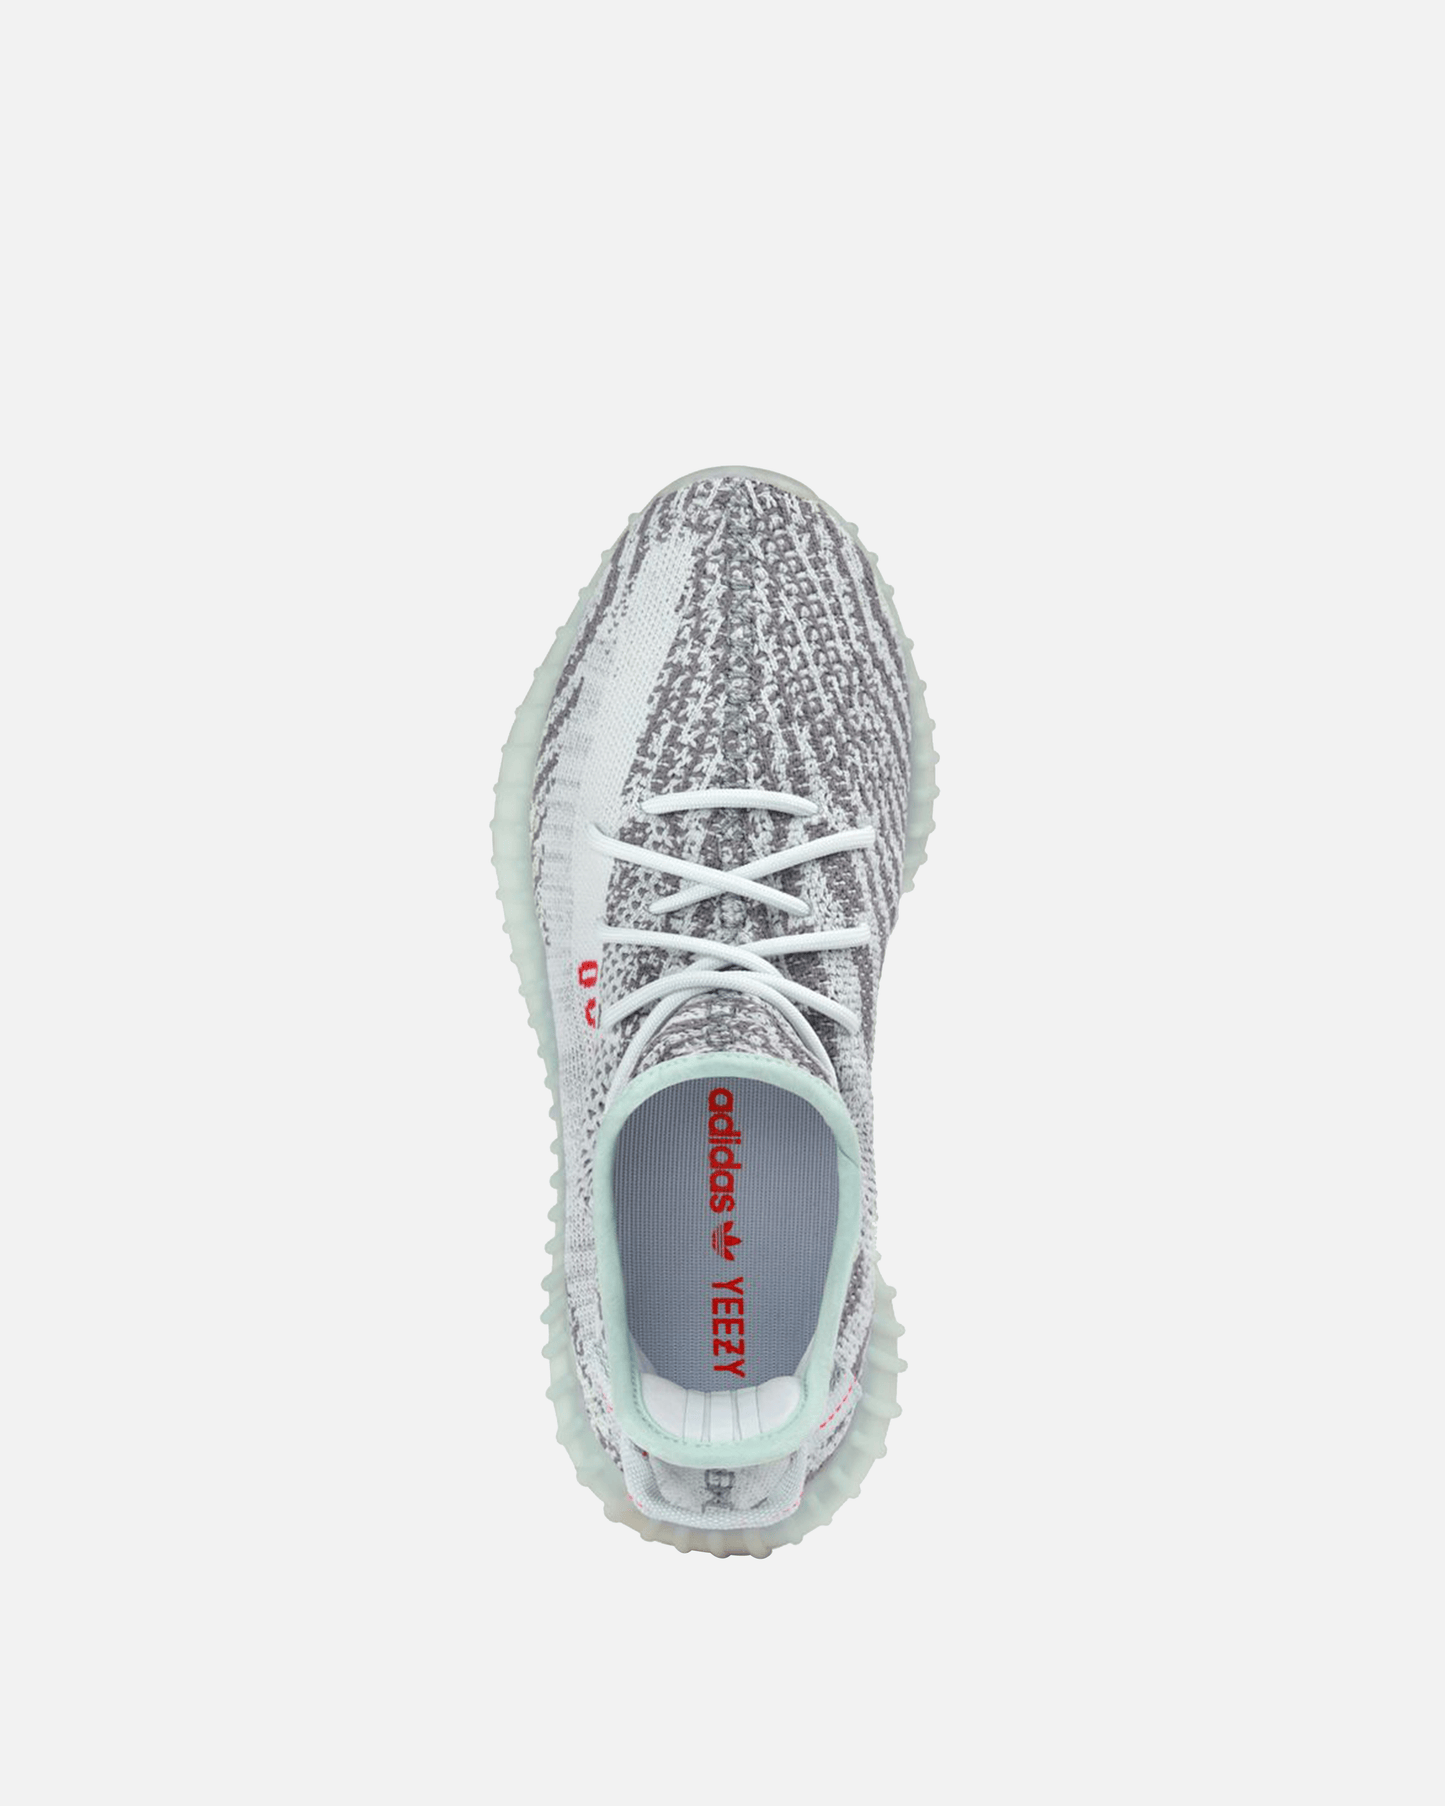 Adidas Releases Yeezy Boost 350 V2 'Blue Tint'